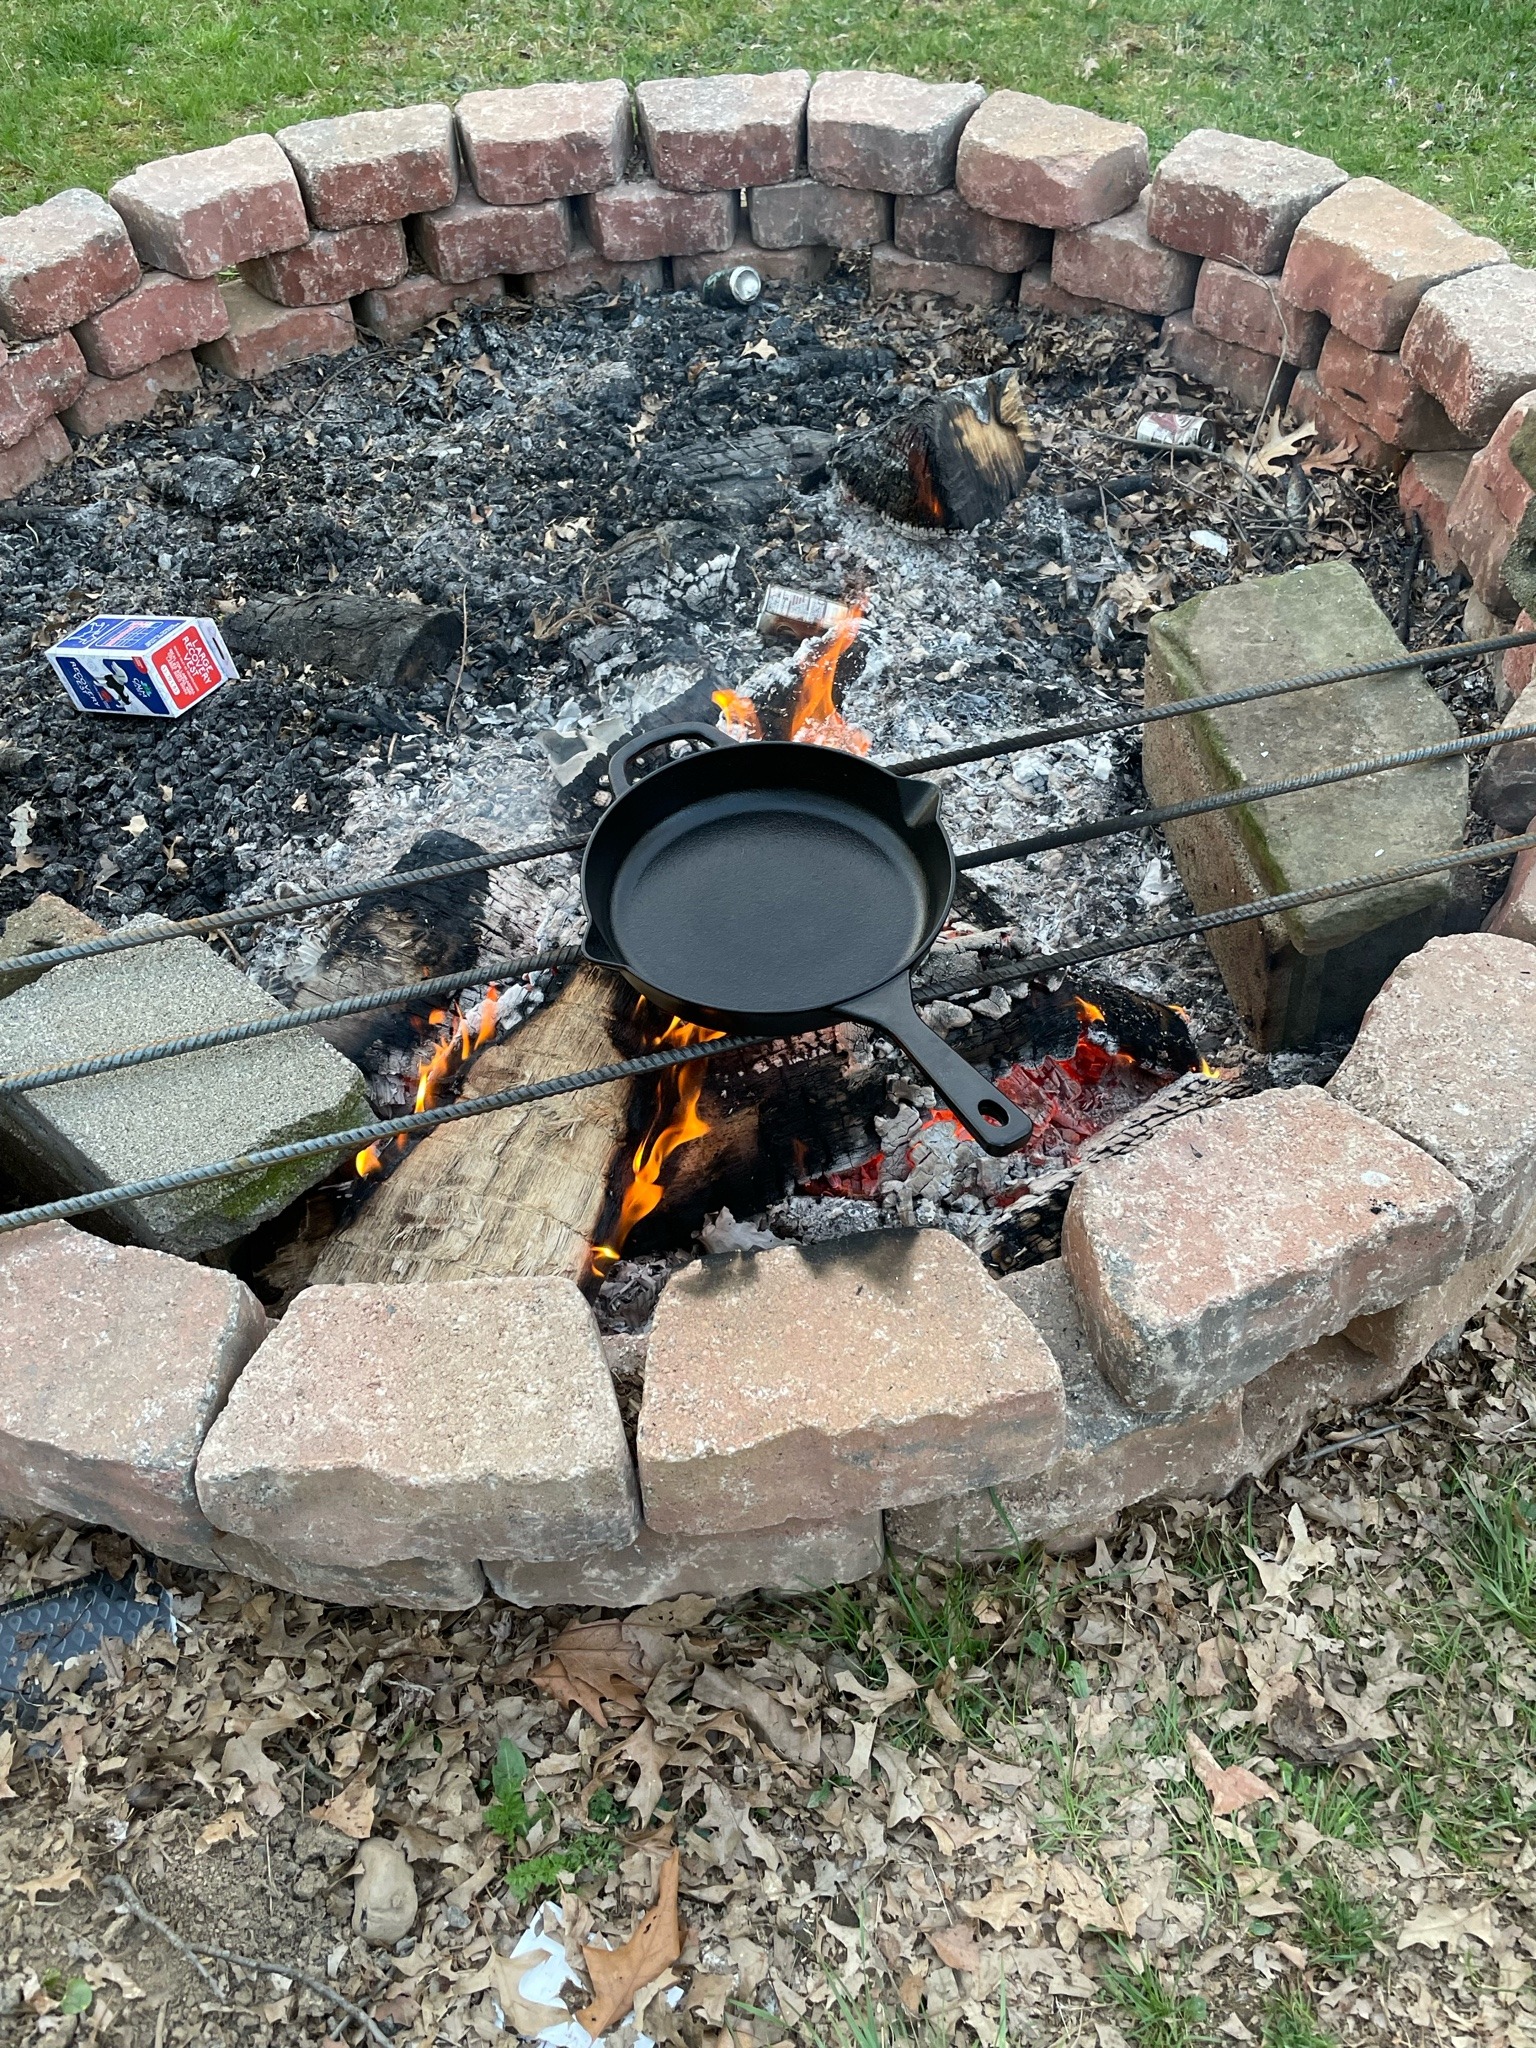 katiiie-lynn:My parents came over to lend us their rototiller today and Adam’s new friend came over to hang out and brought us steaks for dinner, but we don’t have a grill yet so we improvised and cooked them over our firepit instead 🥰🤤